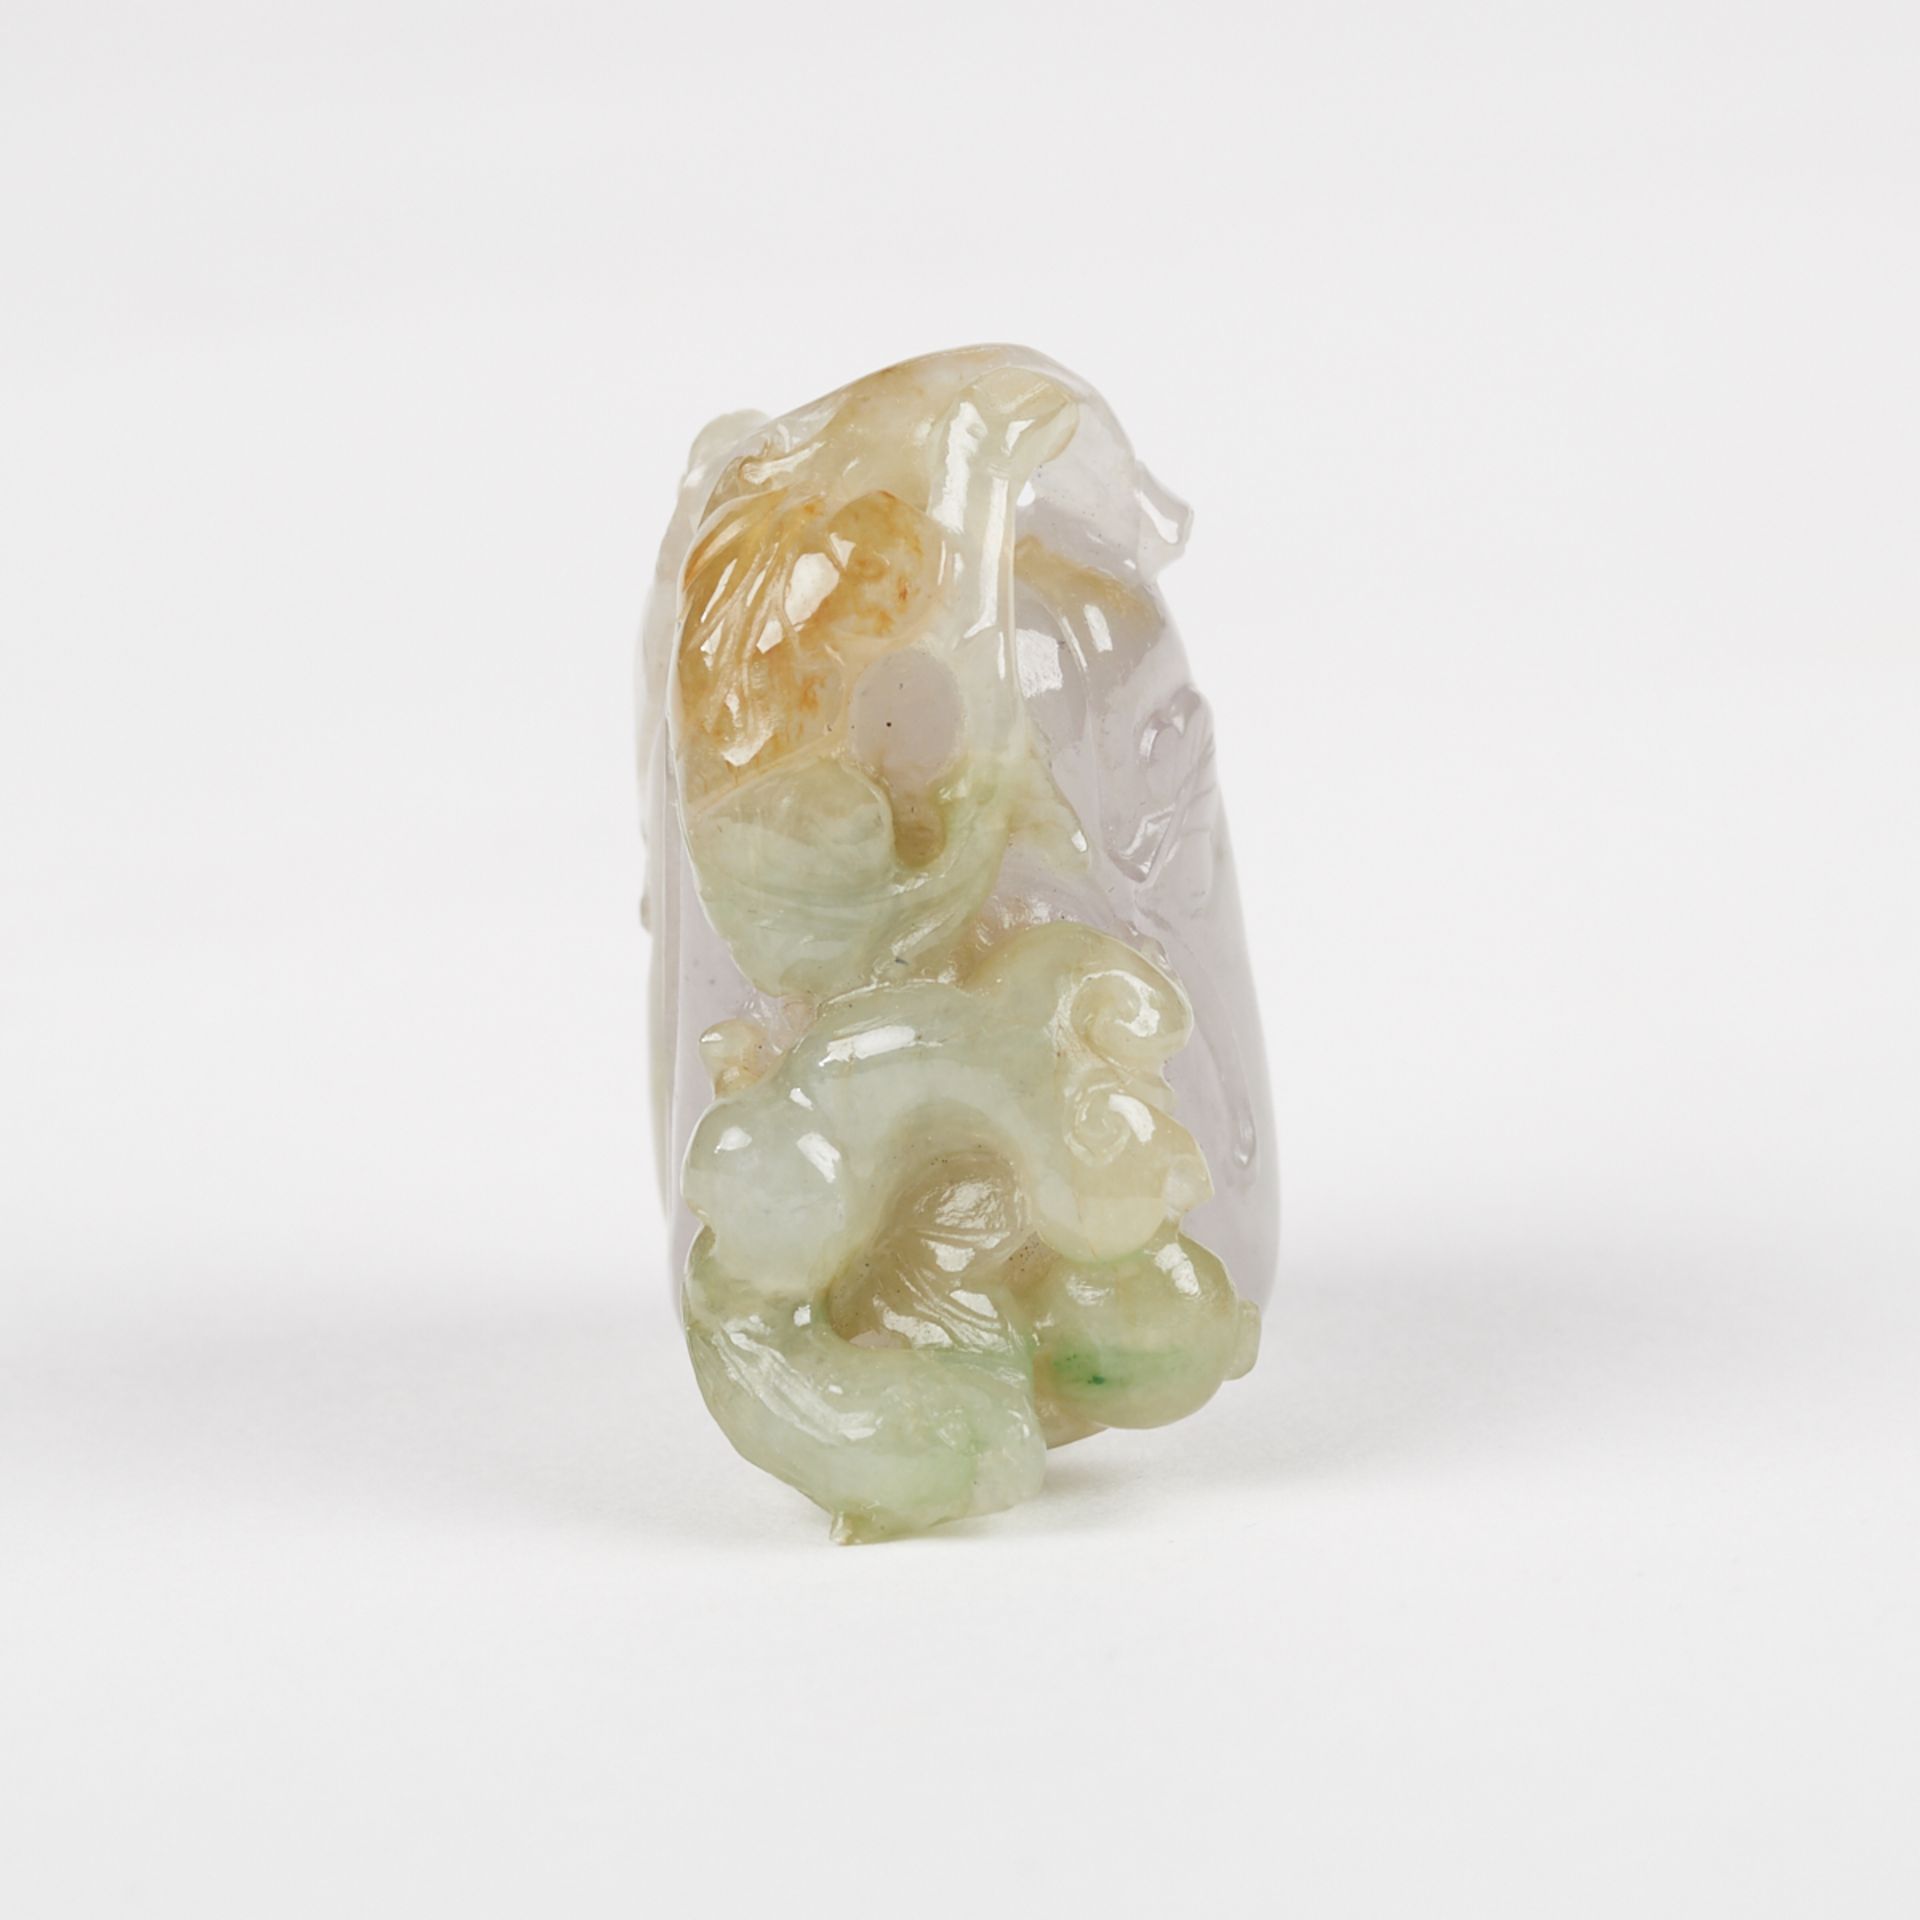 Chinese Lavender Celadon Jade Melon Carving - Image 5 of 7